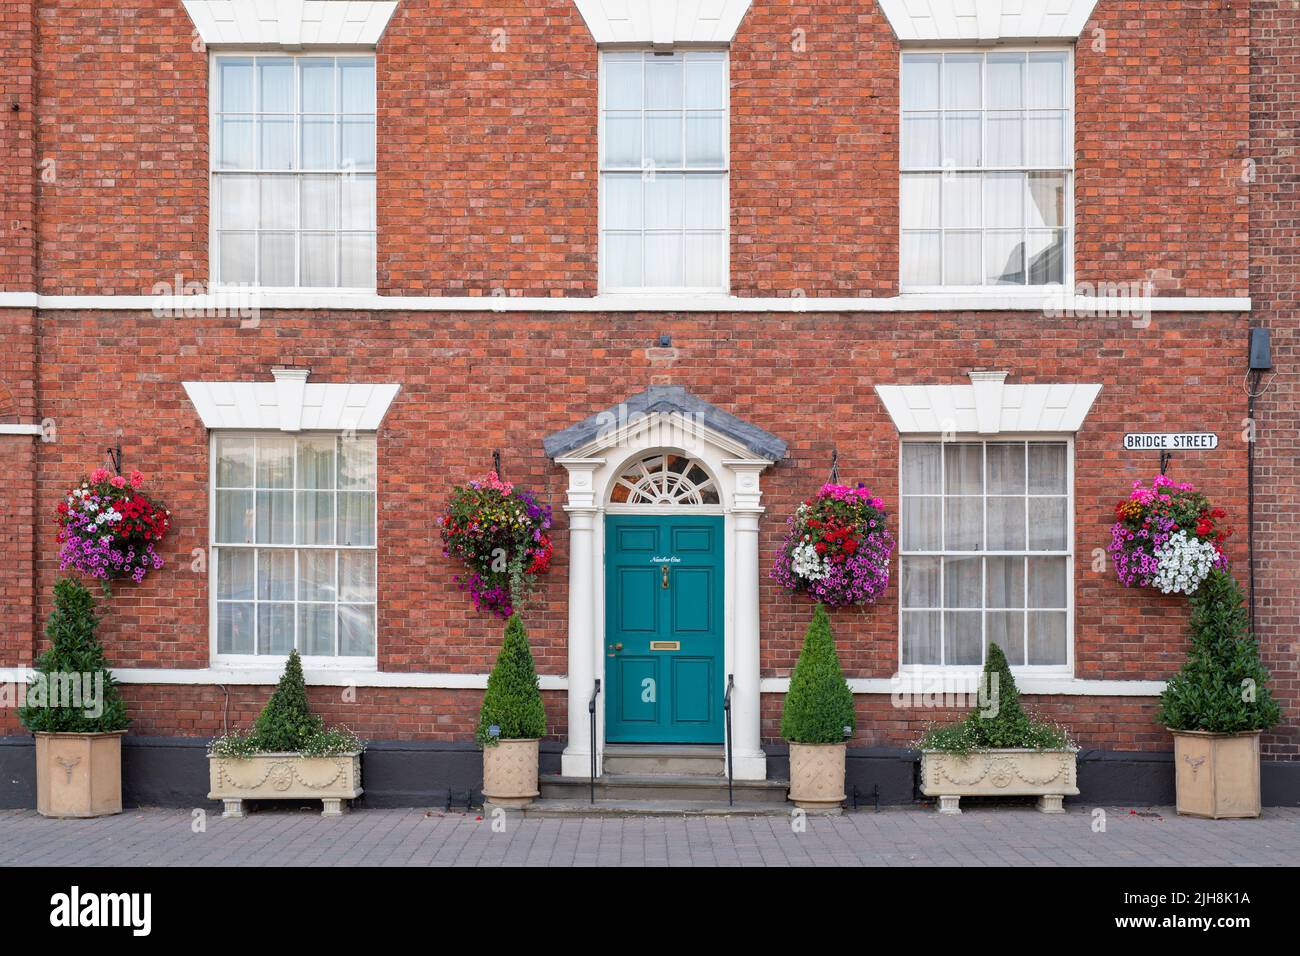 Hanging baskets of flowers on a house exterior in the town of Pershore, Worcestershire, UK Stock Photo